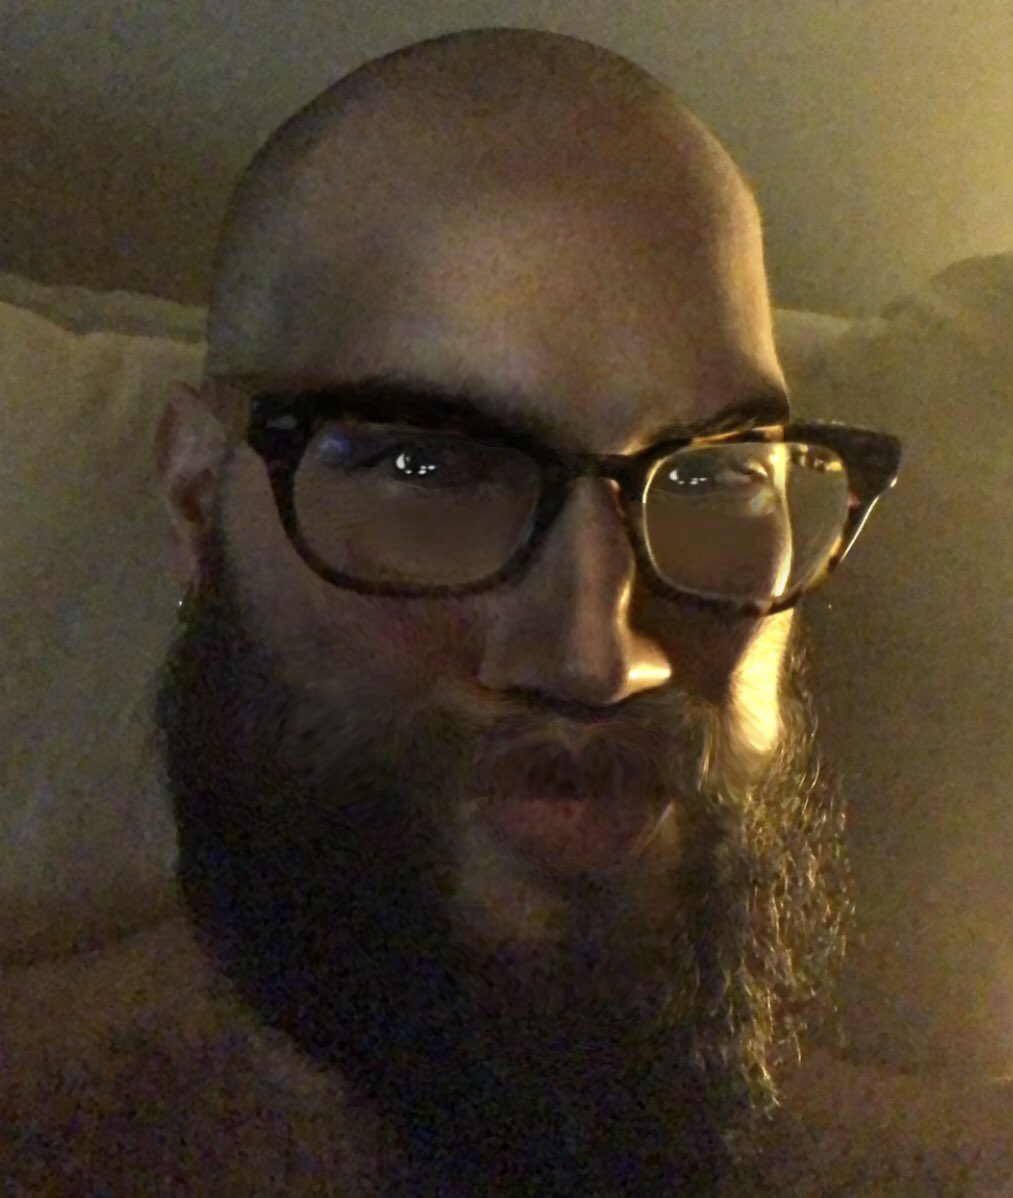 Eli Yudin On Twitter The Handsome Squidward Filter Makes Me Look Like Deviantart Oc Porno Of Kratos This Shit Is Haunted Users commonly paste music over the falling sequence and loop it for varying amounts of time. the handsome squidward filter makes me